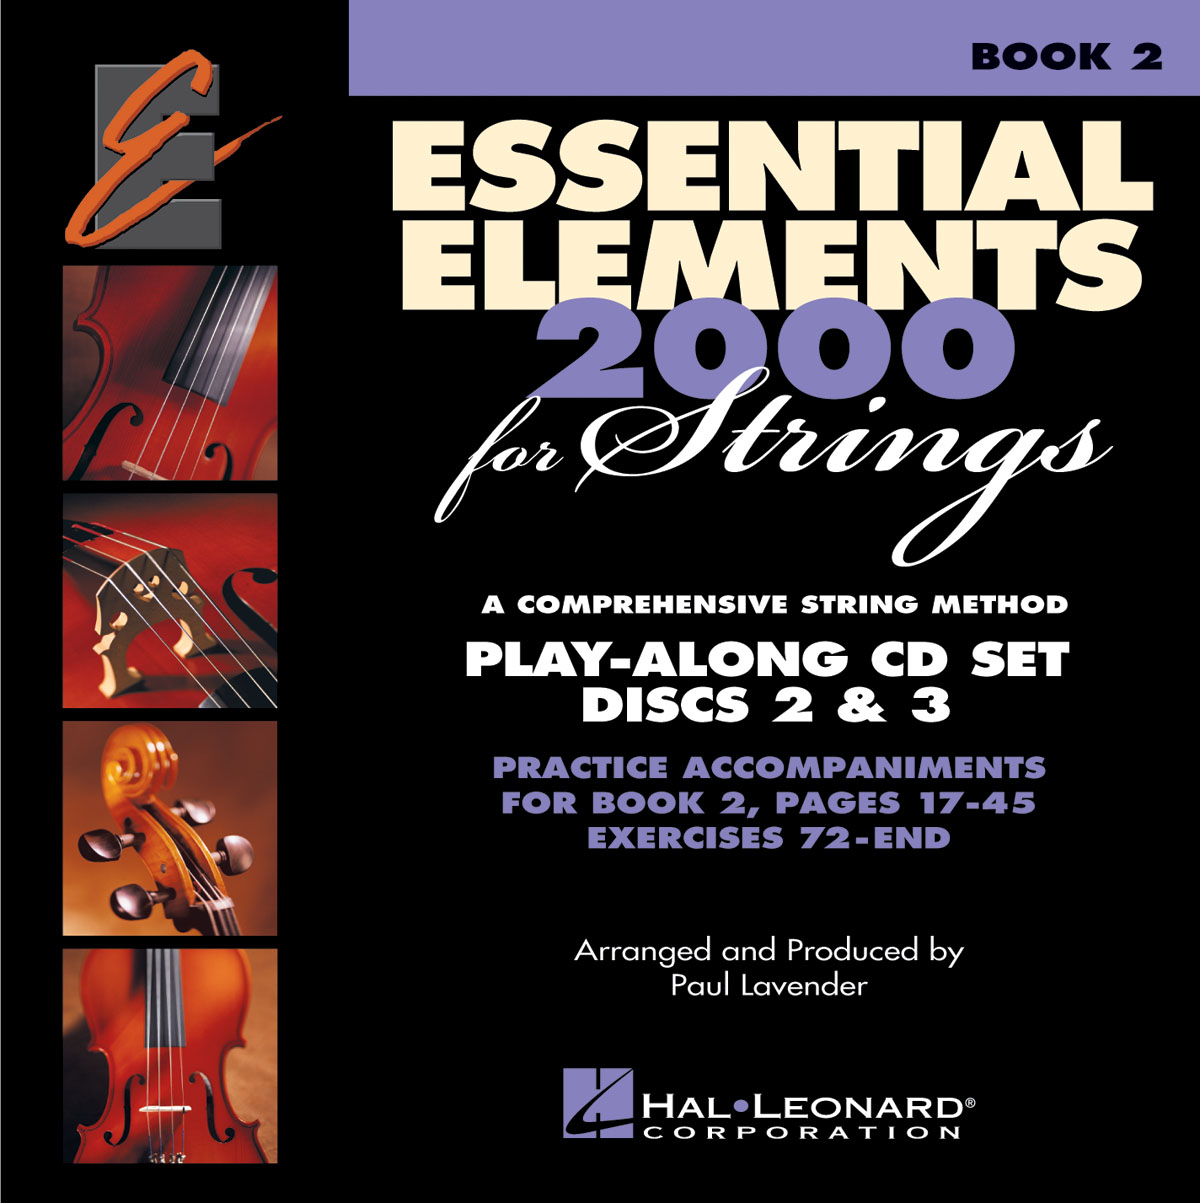 Essential Elements 2000 for Strings - Book 2: String Ensemble: Score